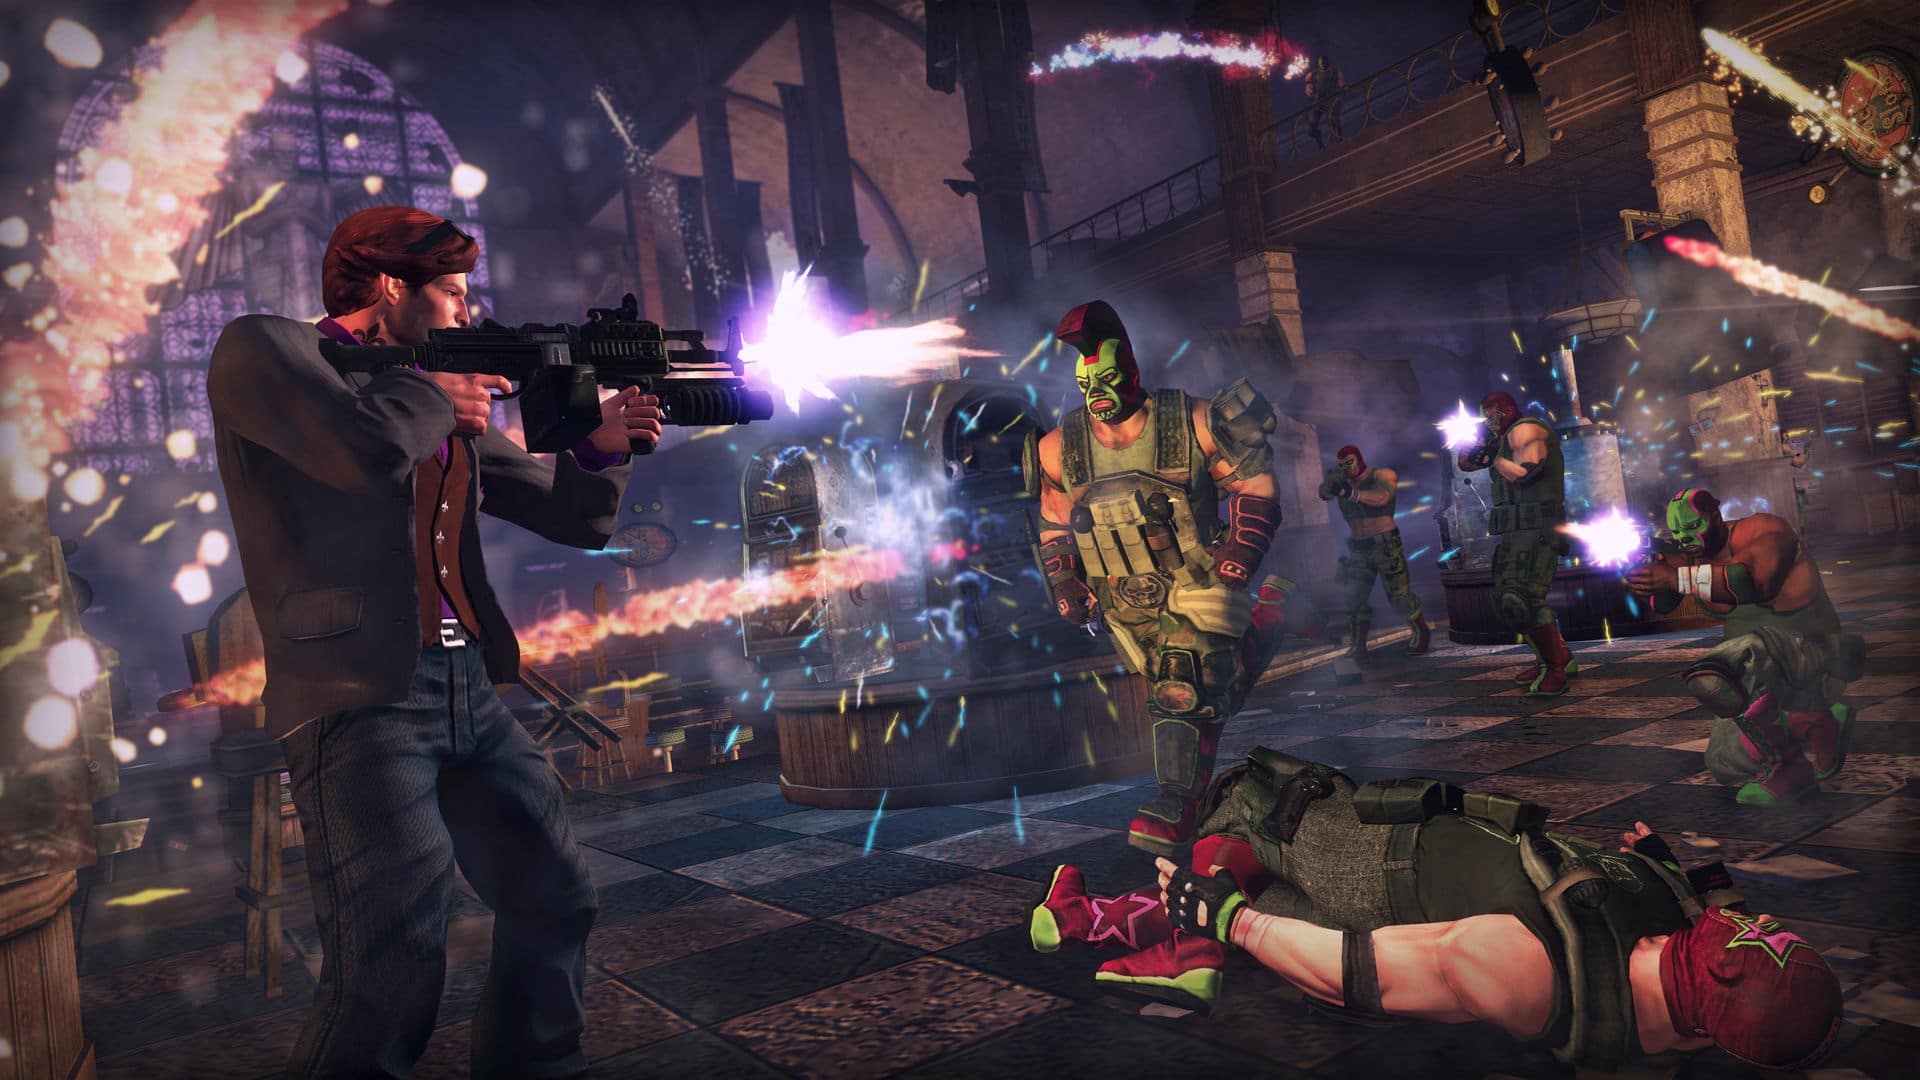 Saints row : the third - the full package